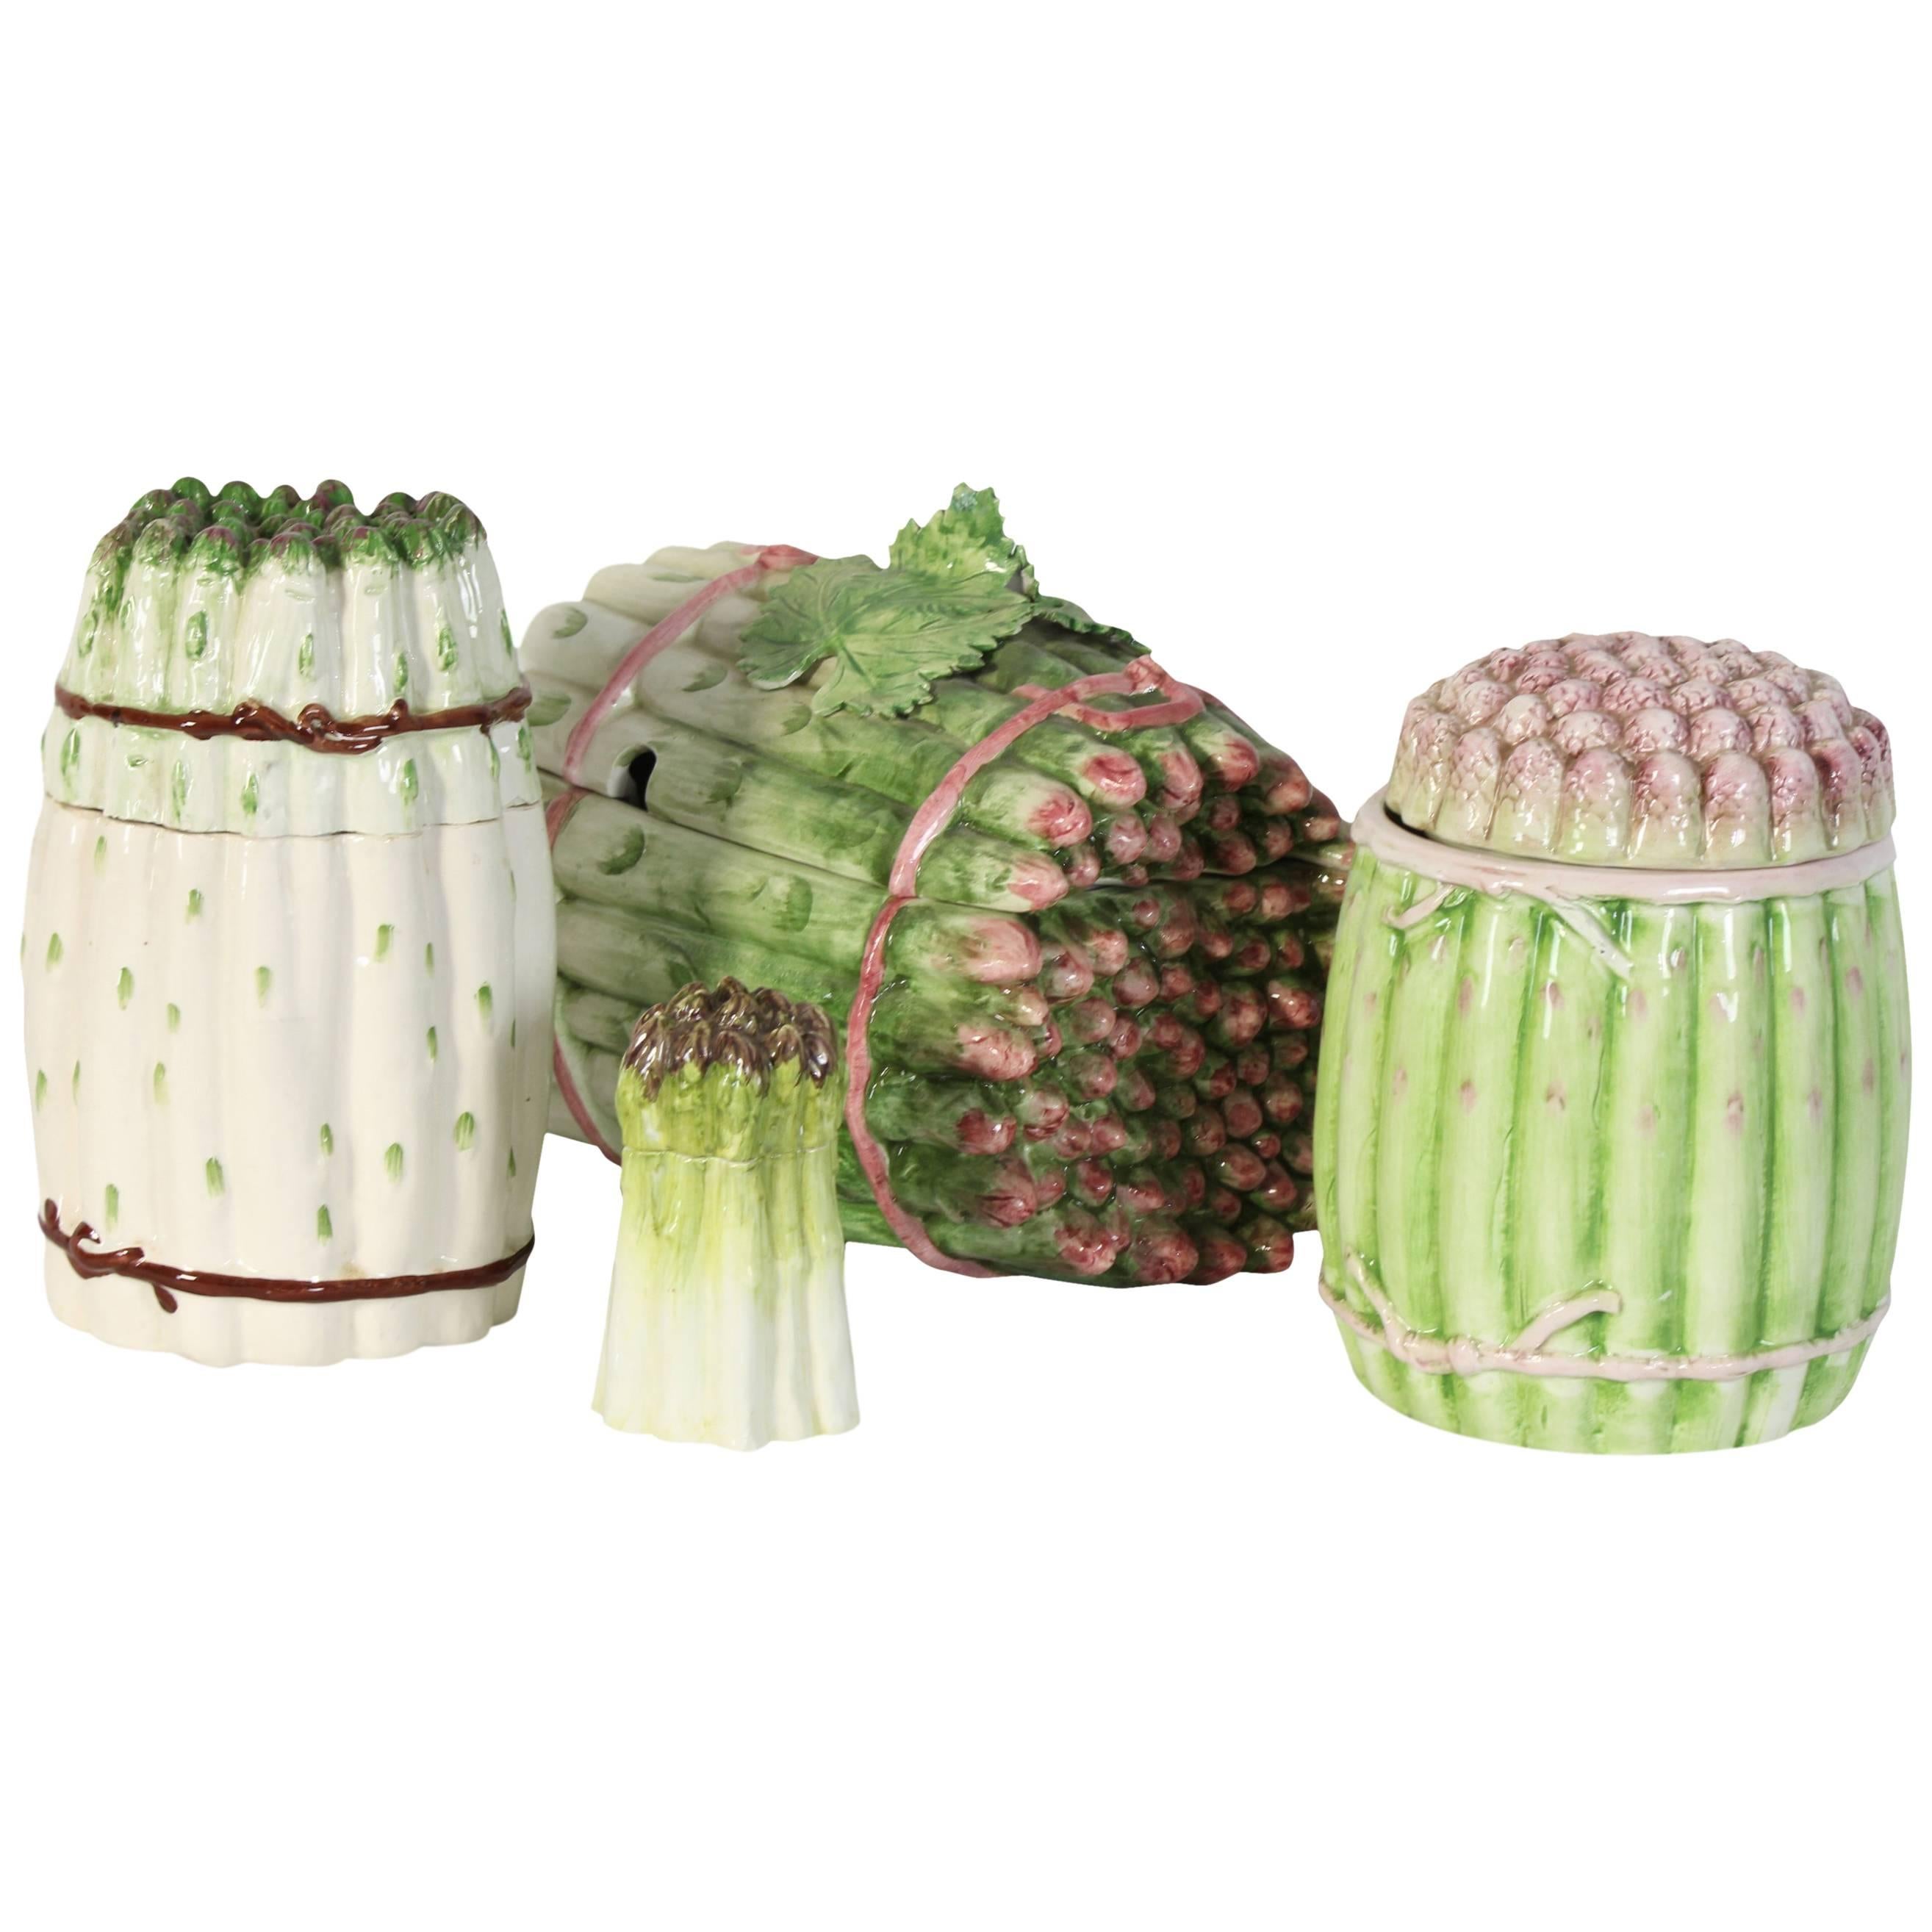 Collection of Vintage Italian Ceramic Asparagus Containers 